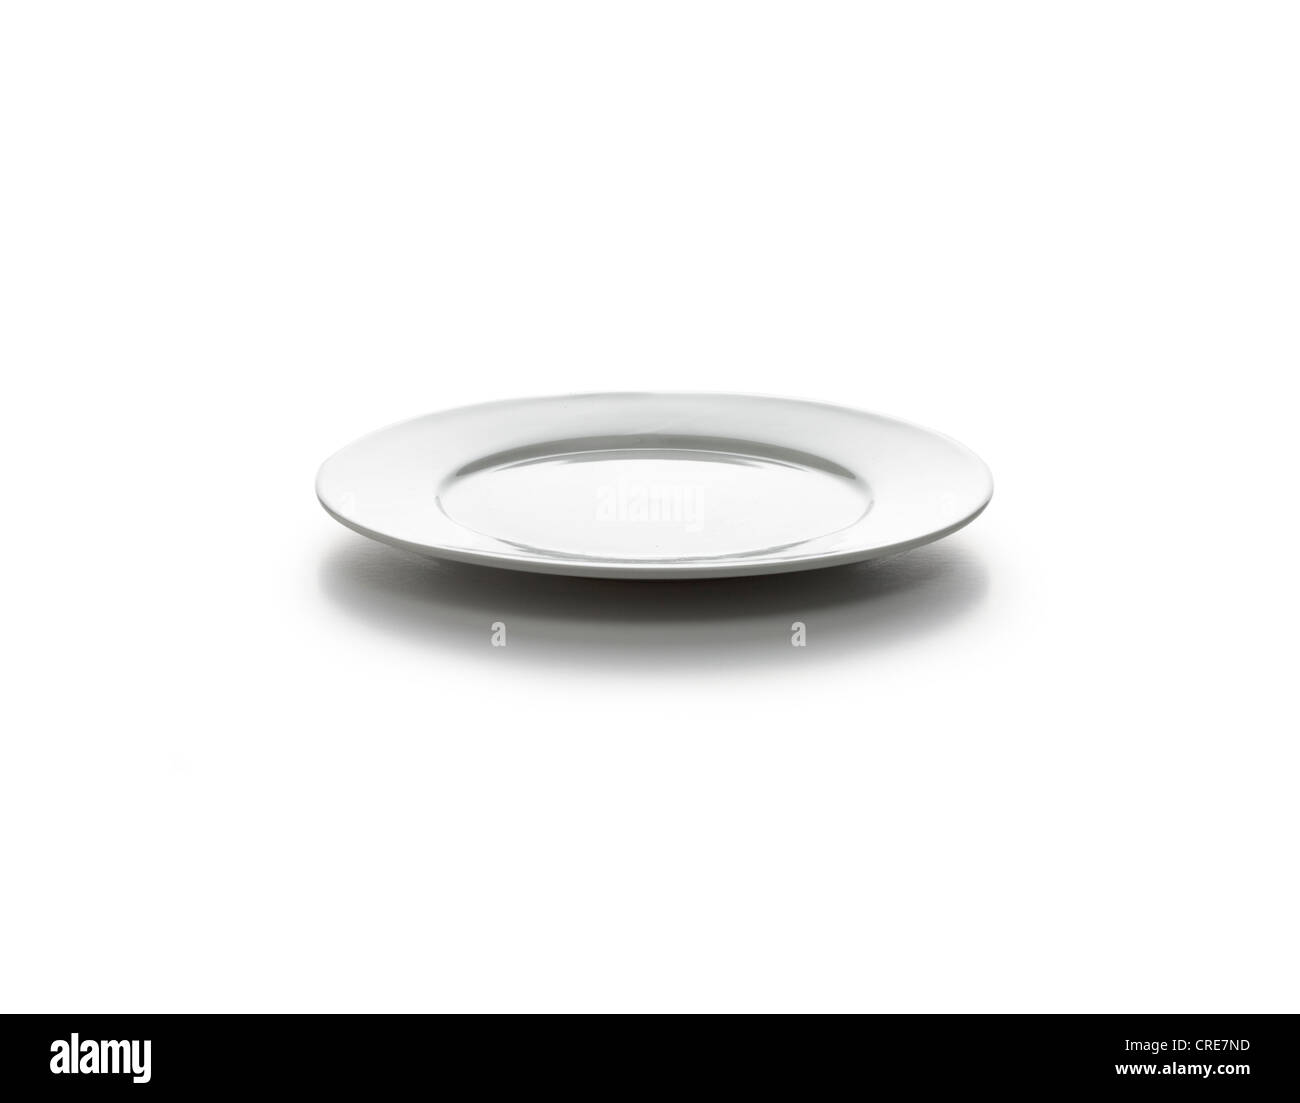 A white plate Stock Photo